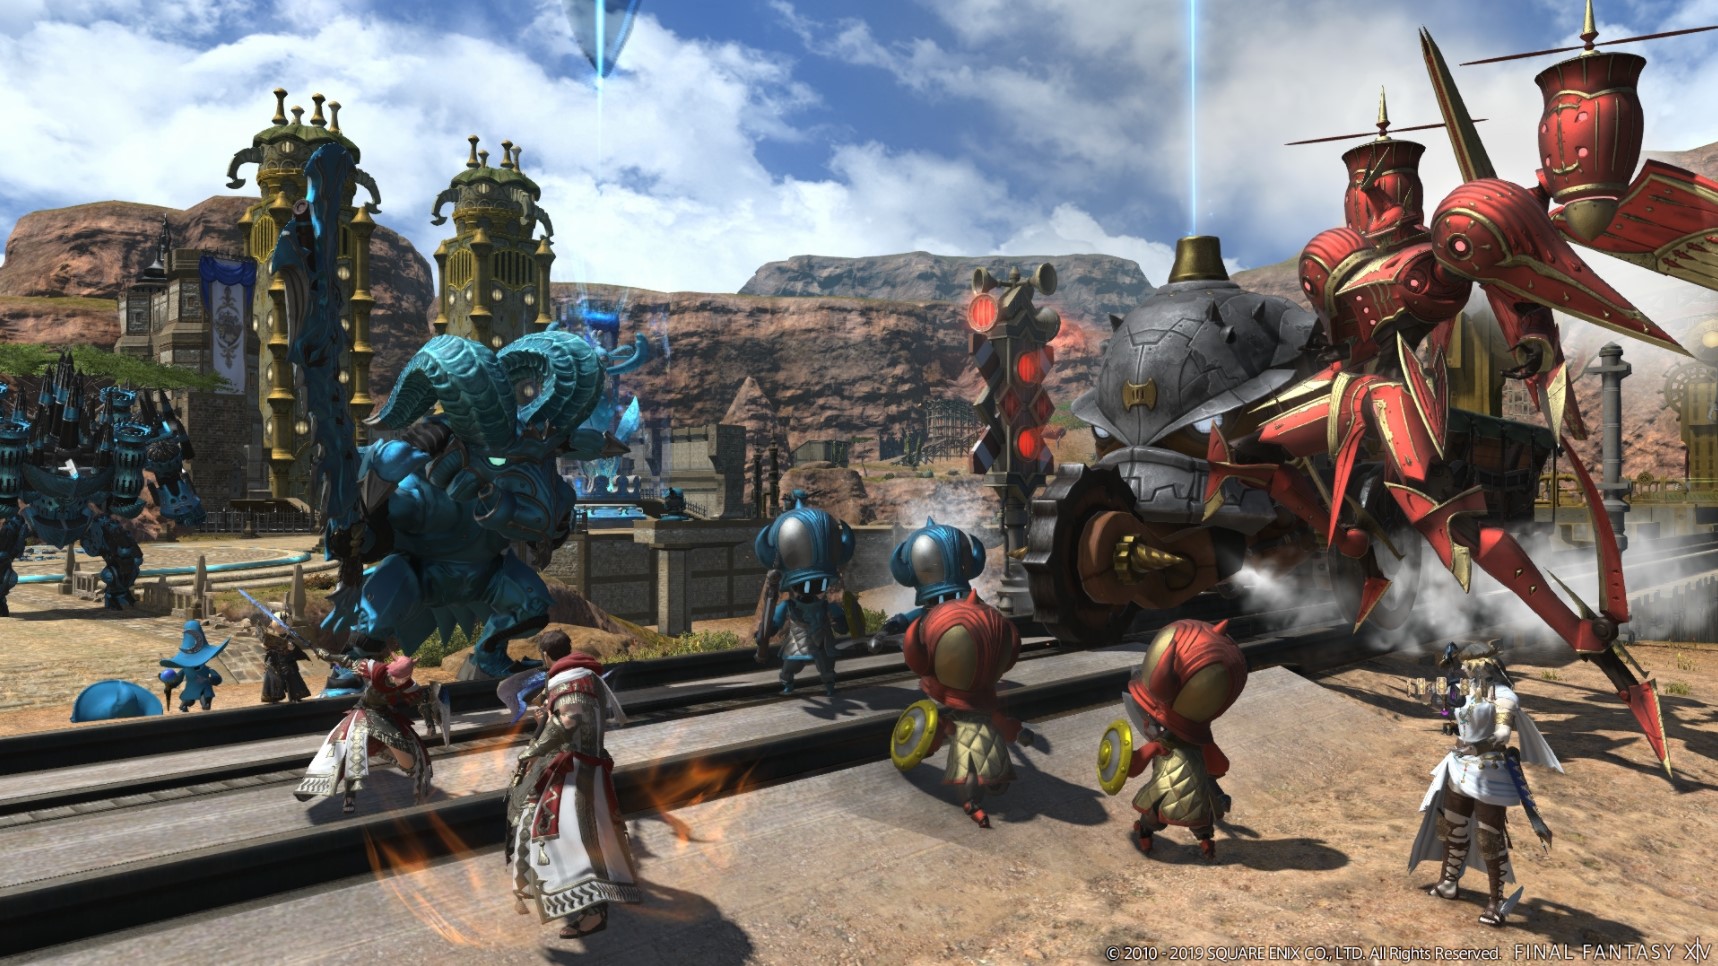 How to win at Rival Wings in Final Fantasy XIV